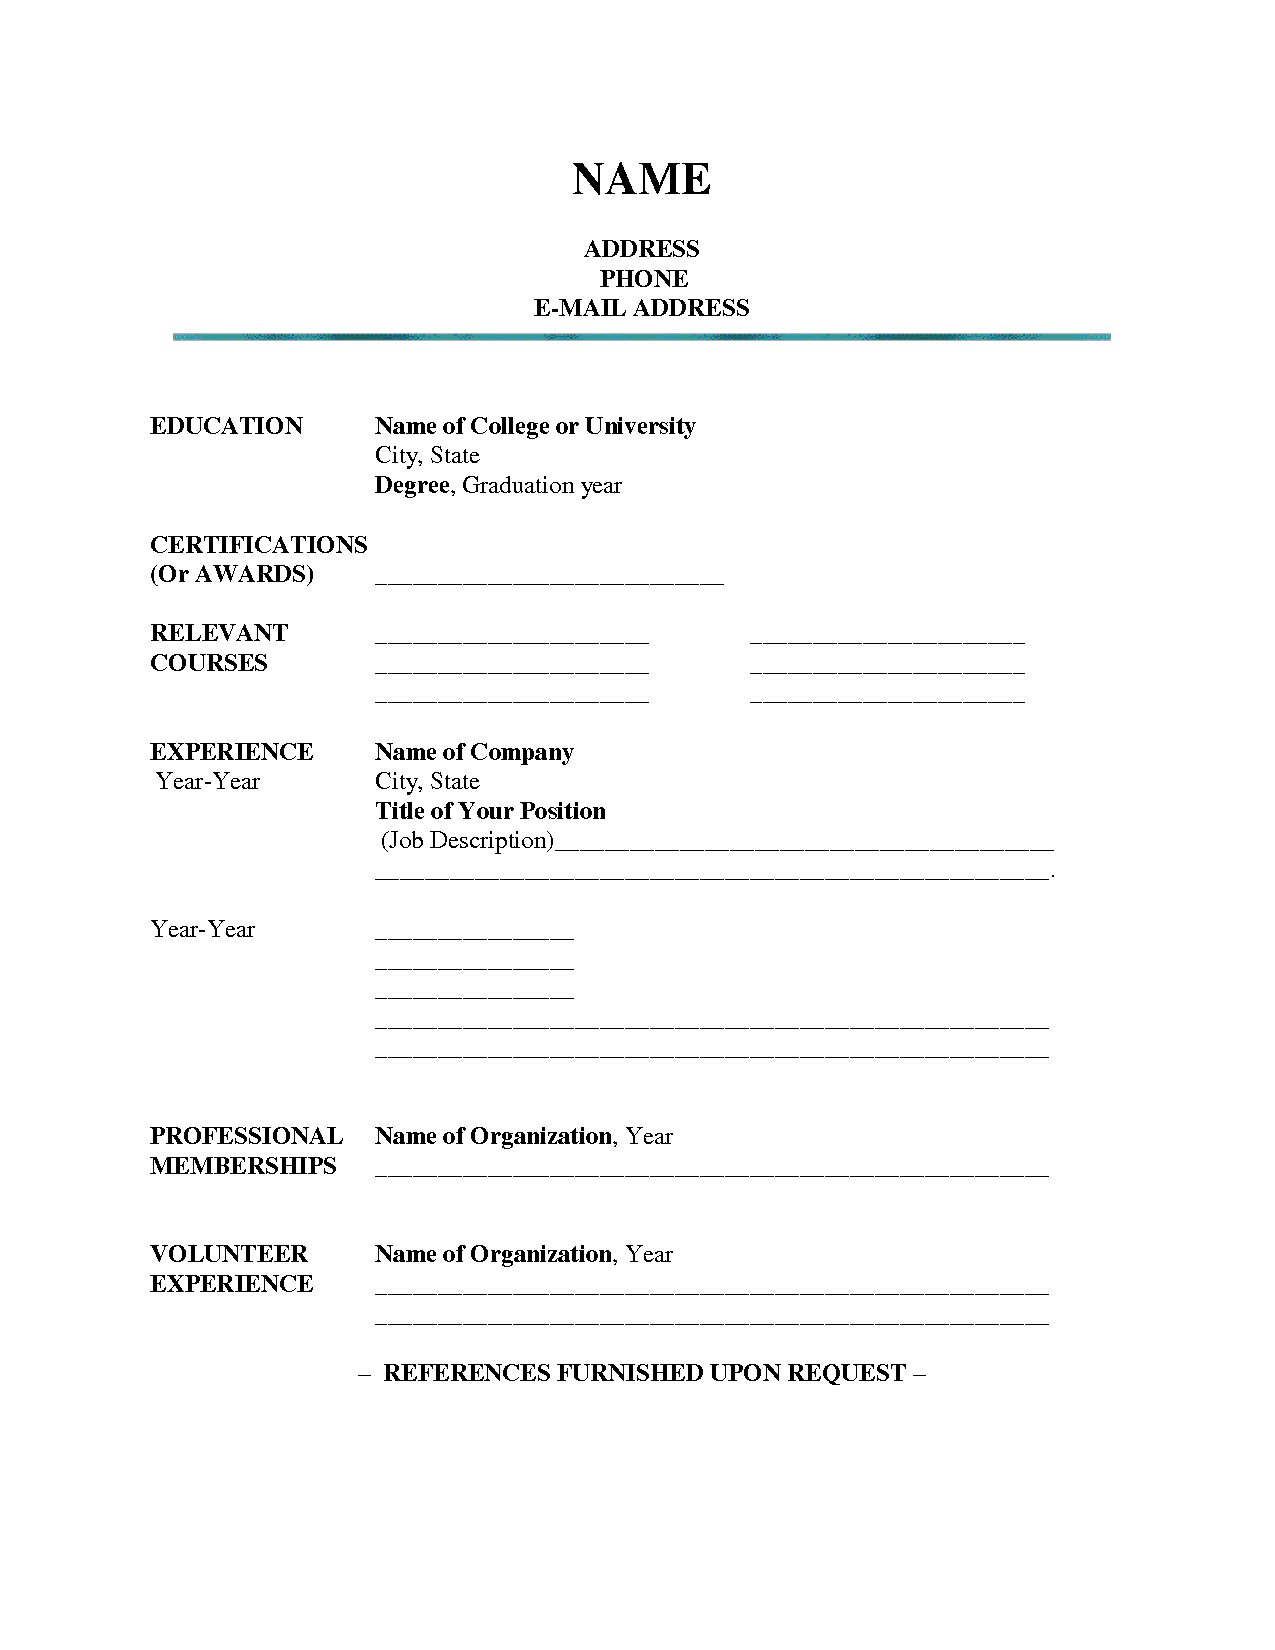 Blank Resume Templates For Microsoft Word - Calep.midnightpig.co In Blank Resume Templates For Microsoft Word